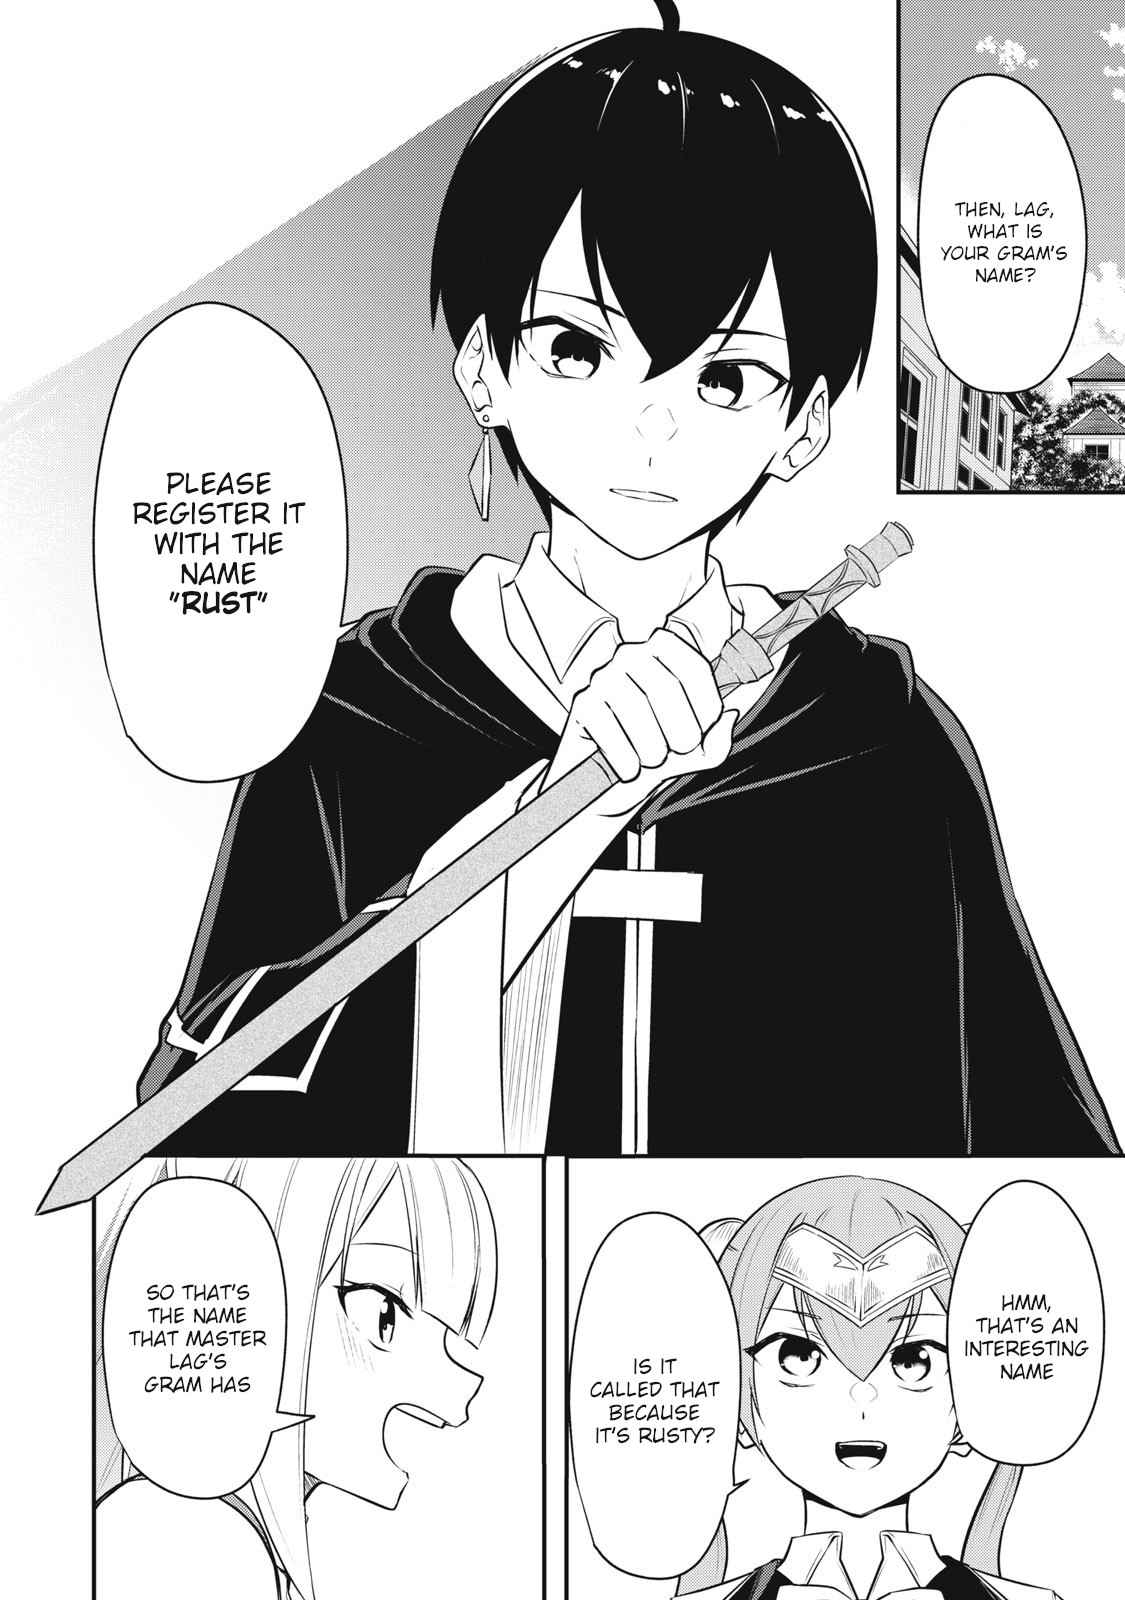 The Last Sage of the Imperial Sword Academy Chapter 5